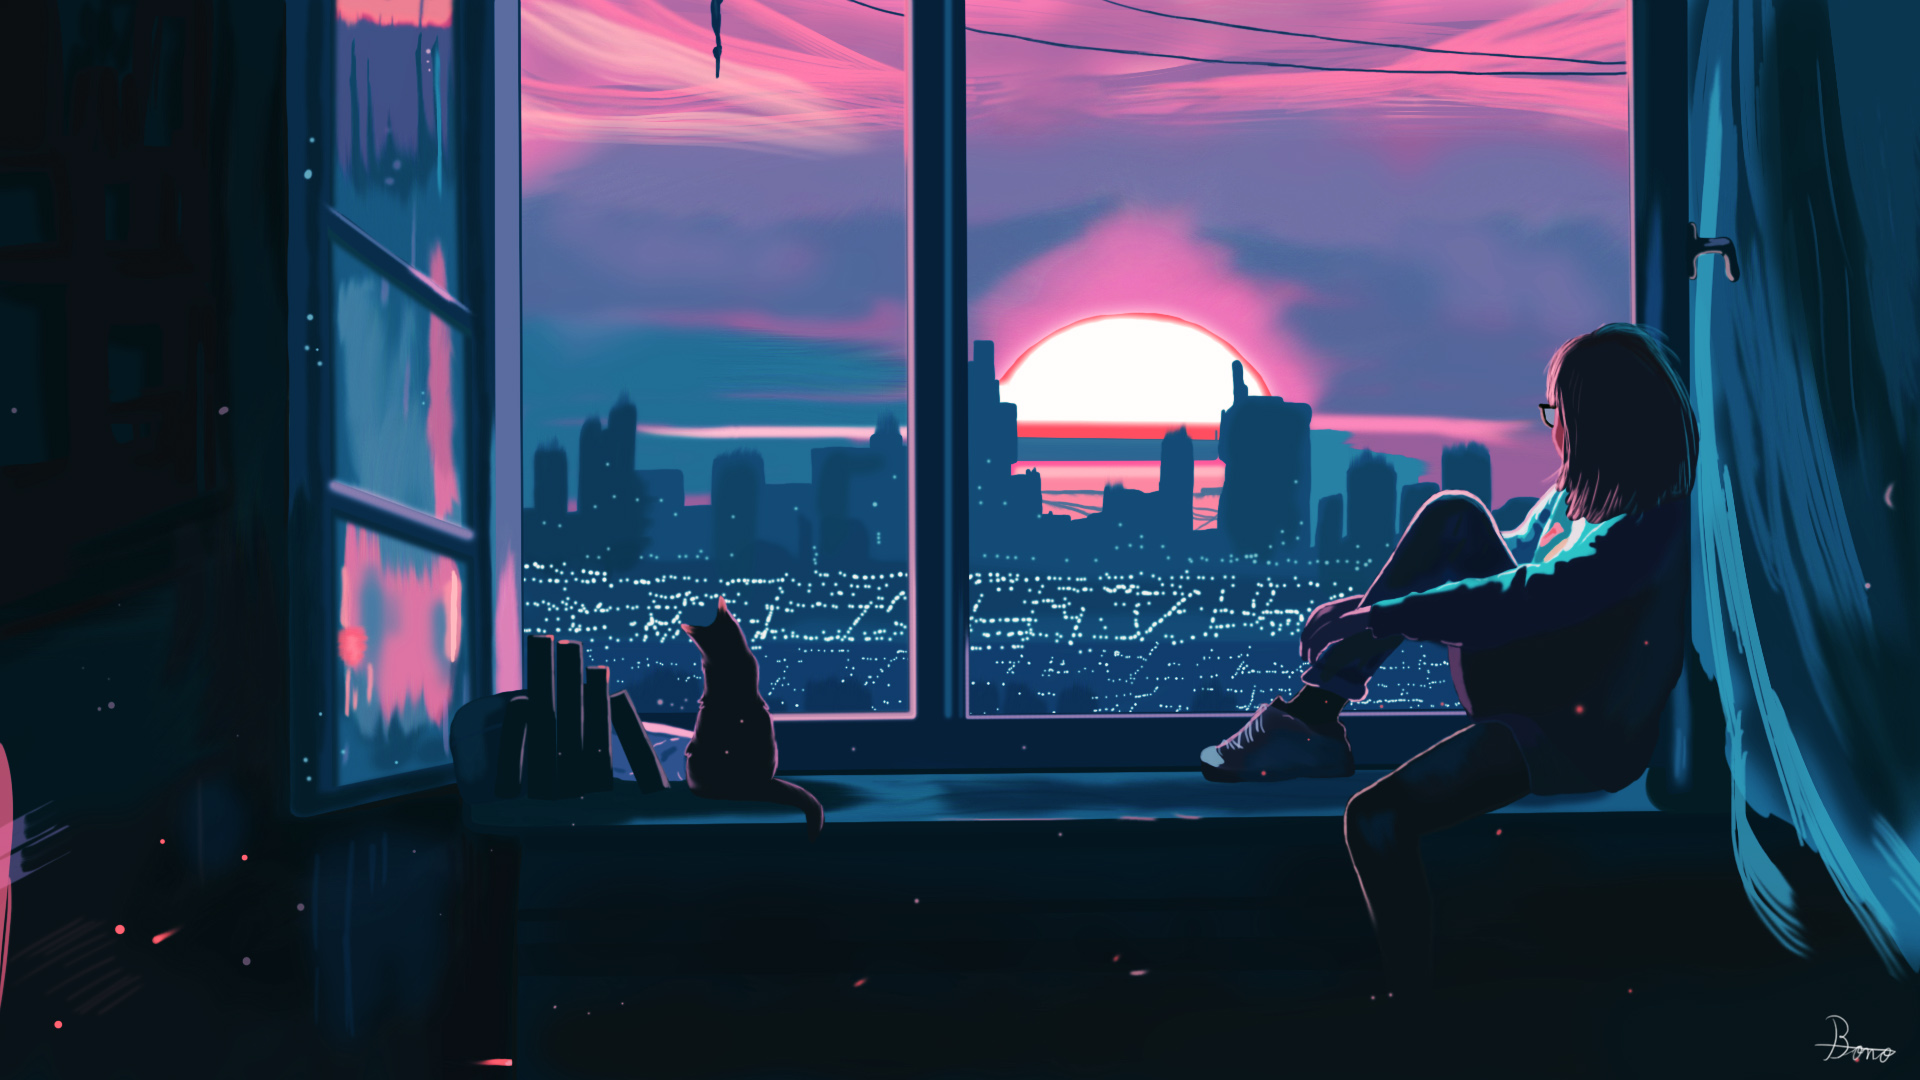 City sunset out the window by BoniiChan21 on DeviantArt